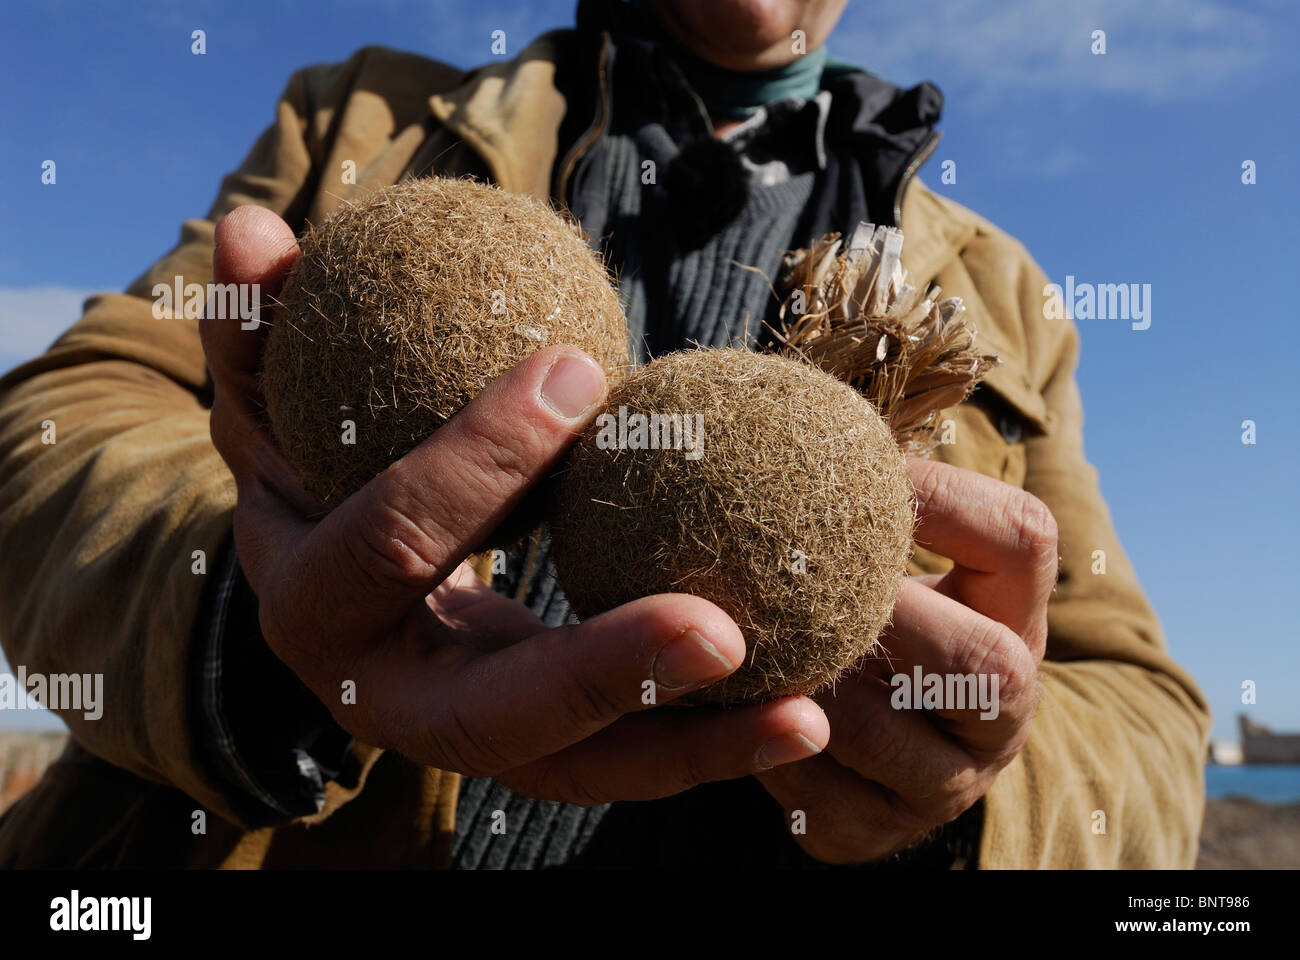 Vendicari. Sicily. Italy. Balls of fibrous material known as egagropili (egagrofile - Italian) formed from the foliage of the seagrass species Posidon Stock Photo